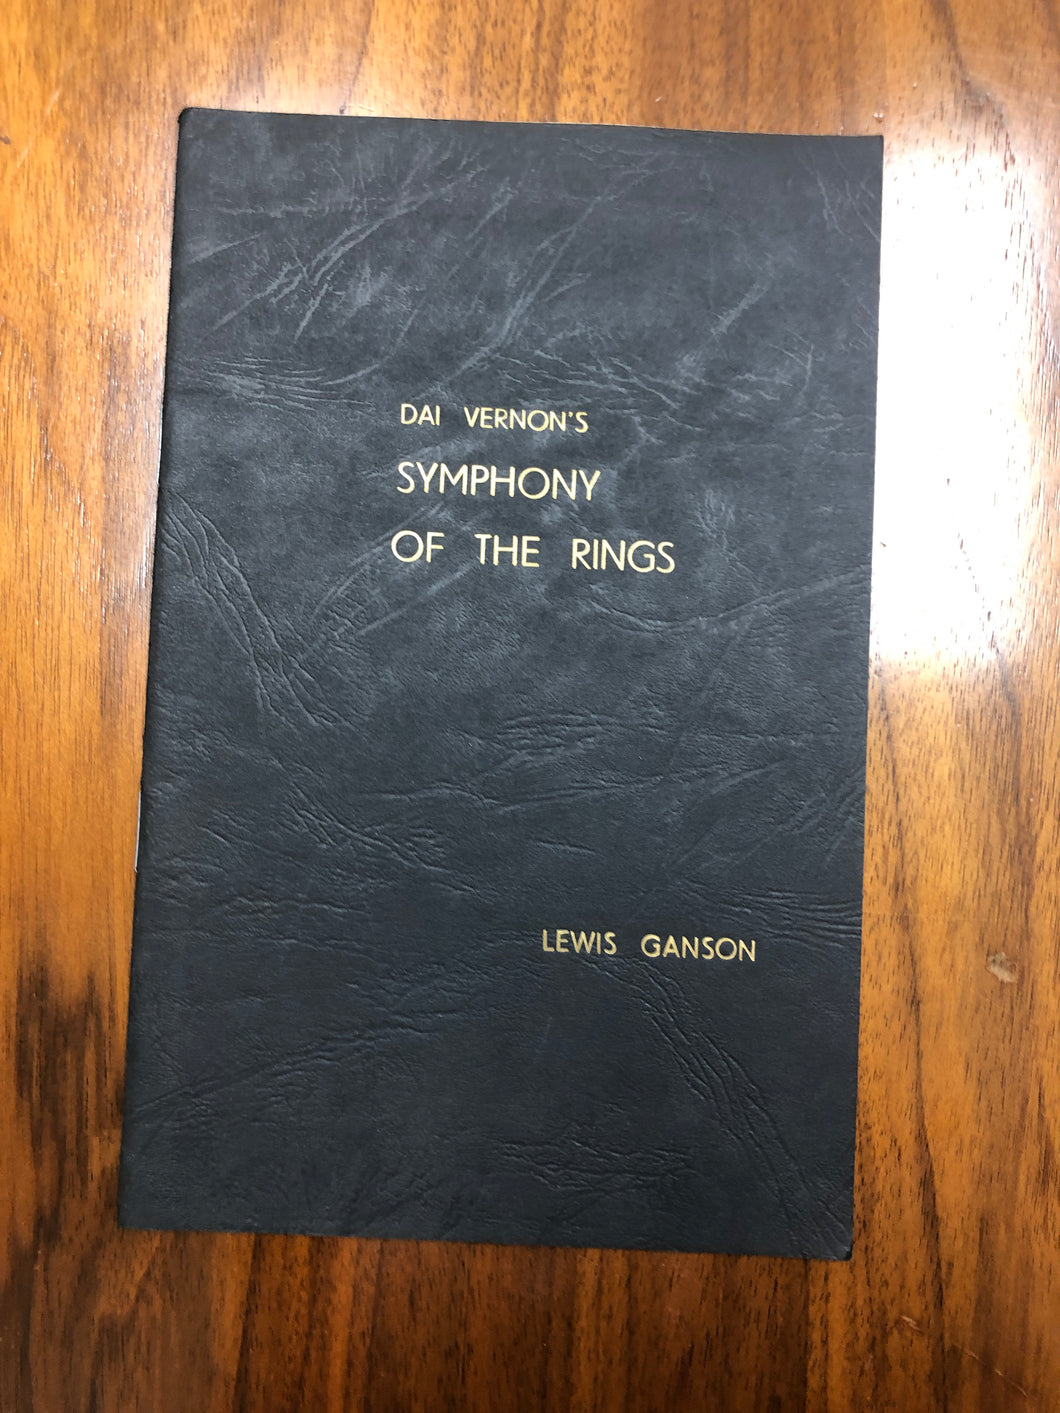 Dai Vernon's Symphony Of The Rings by Lewis Ganson